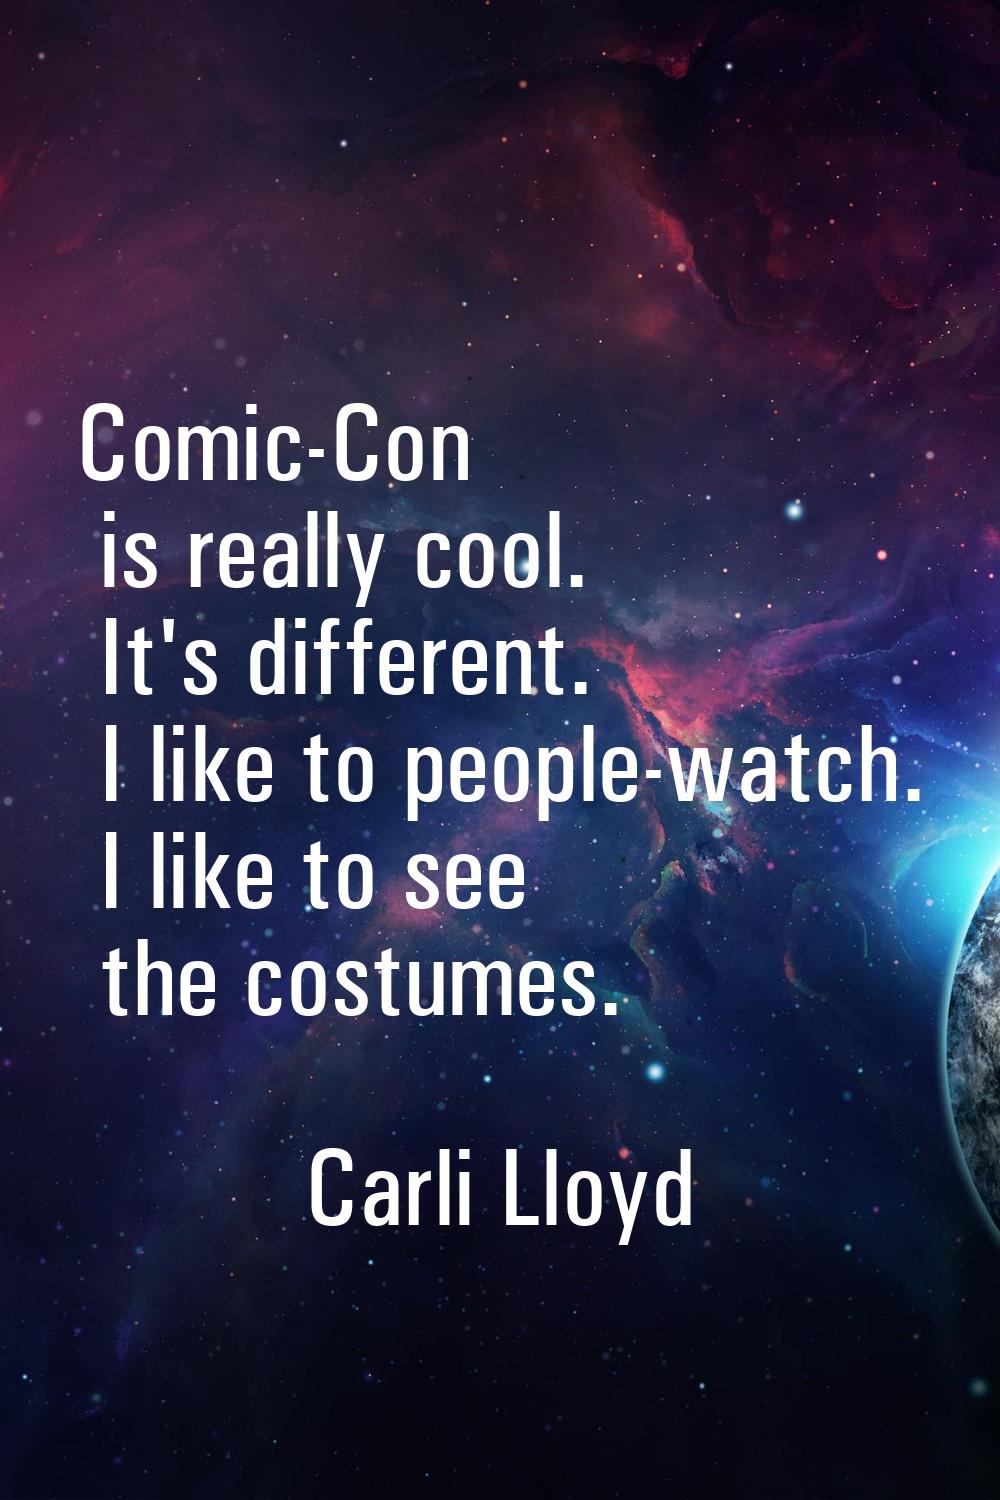 Comic-Con is really cool. It's different. I like to people-watch. I like to see the costumes.